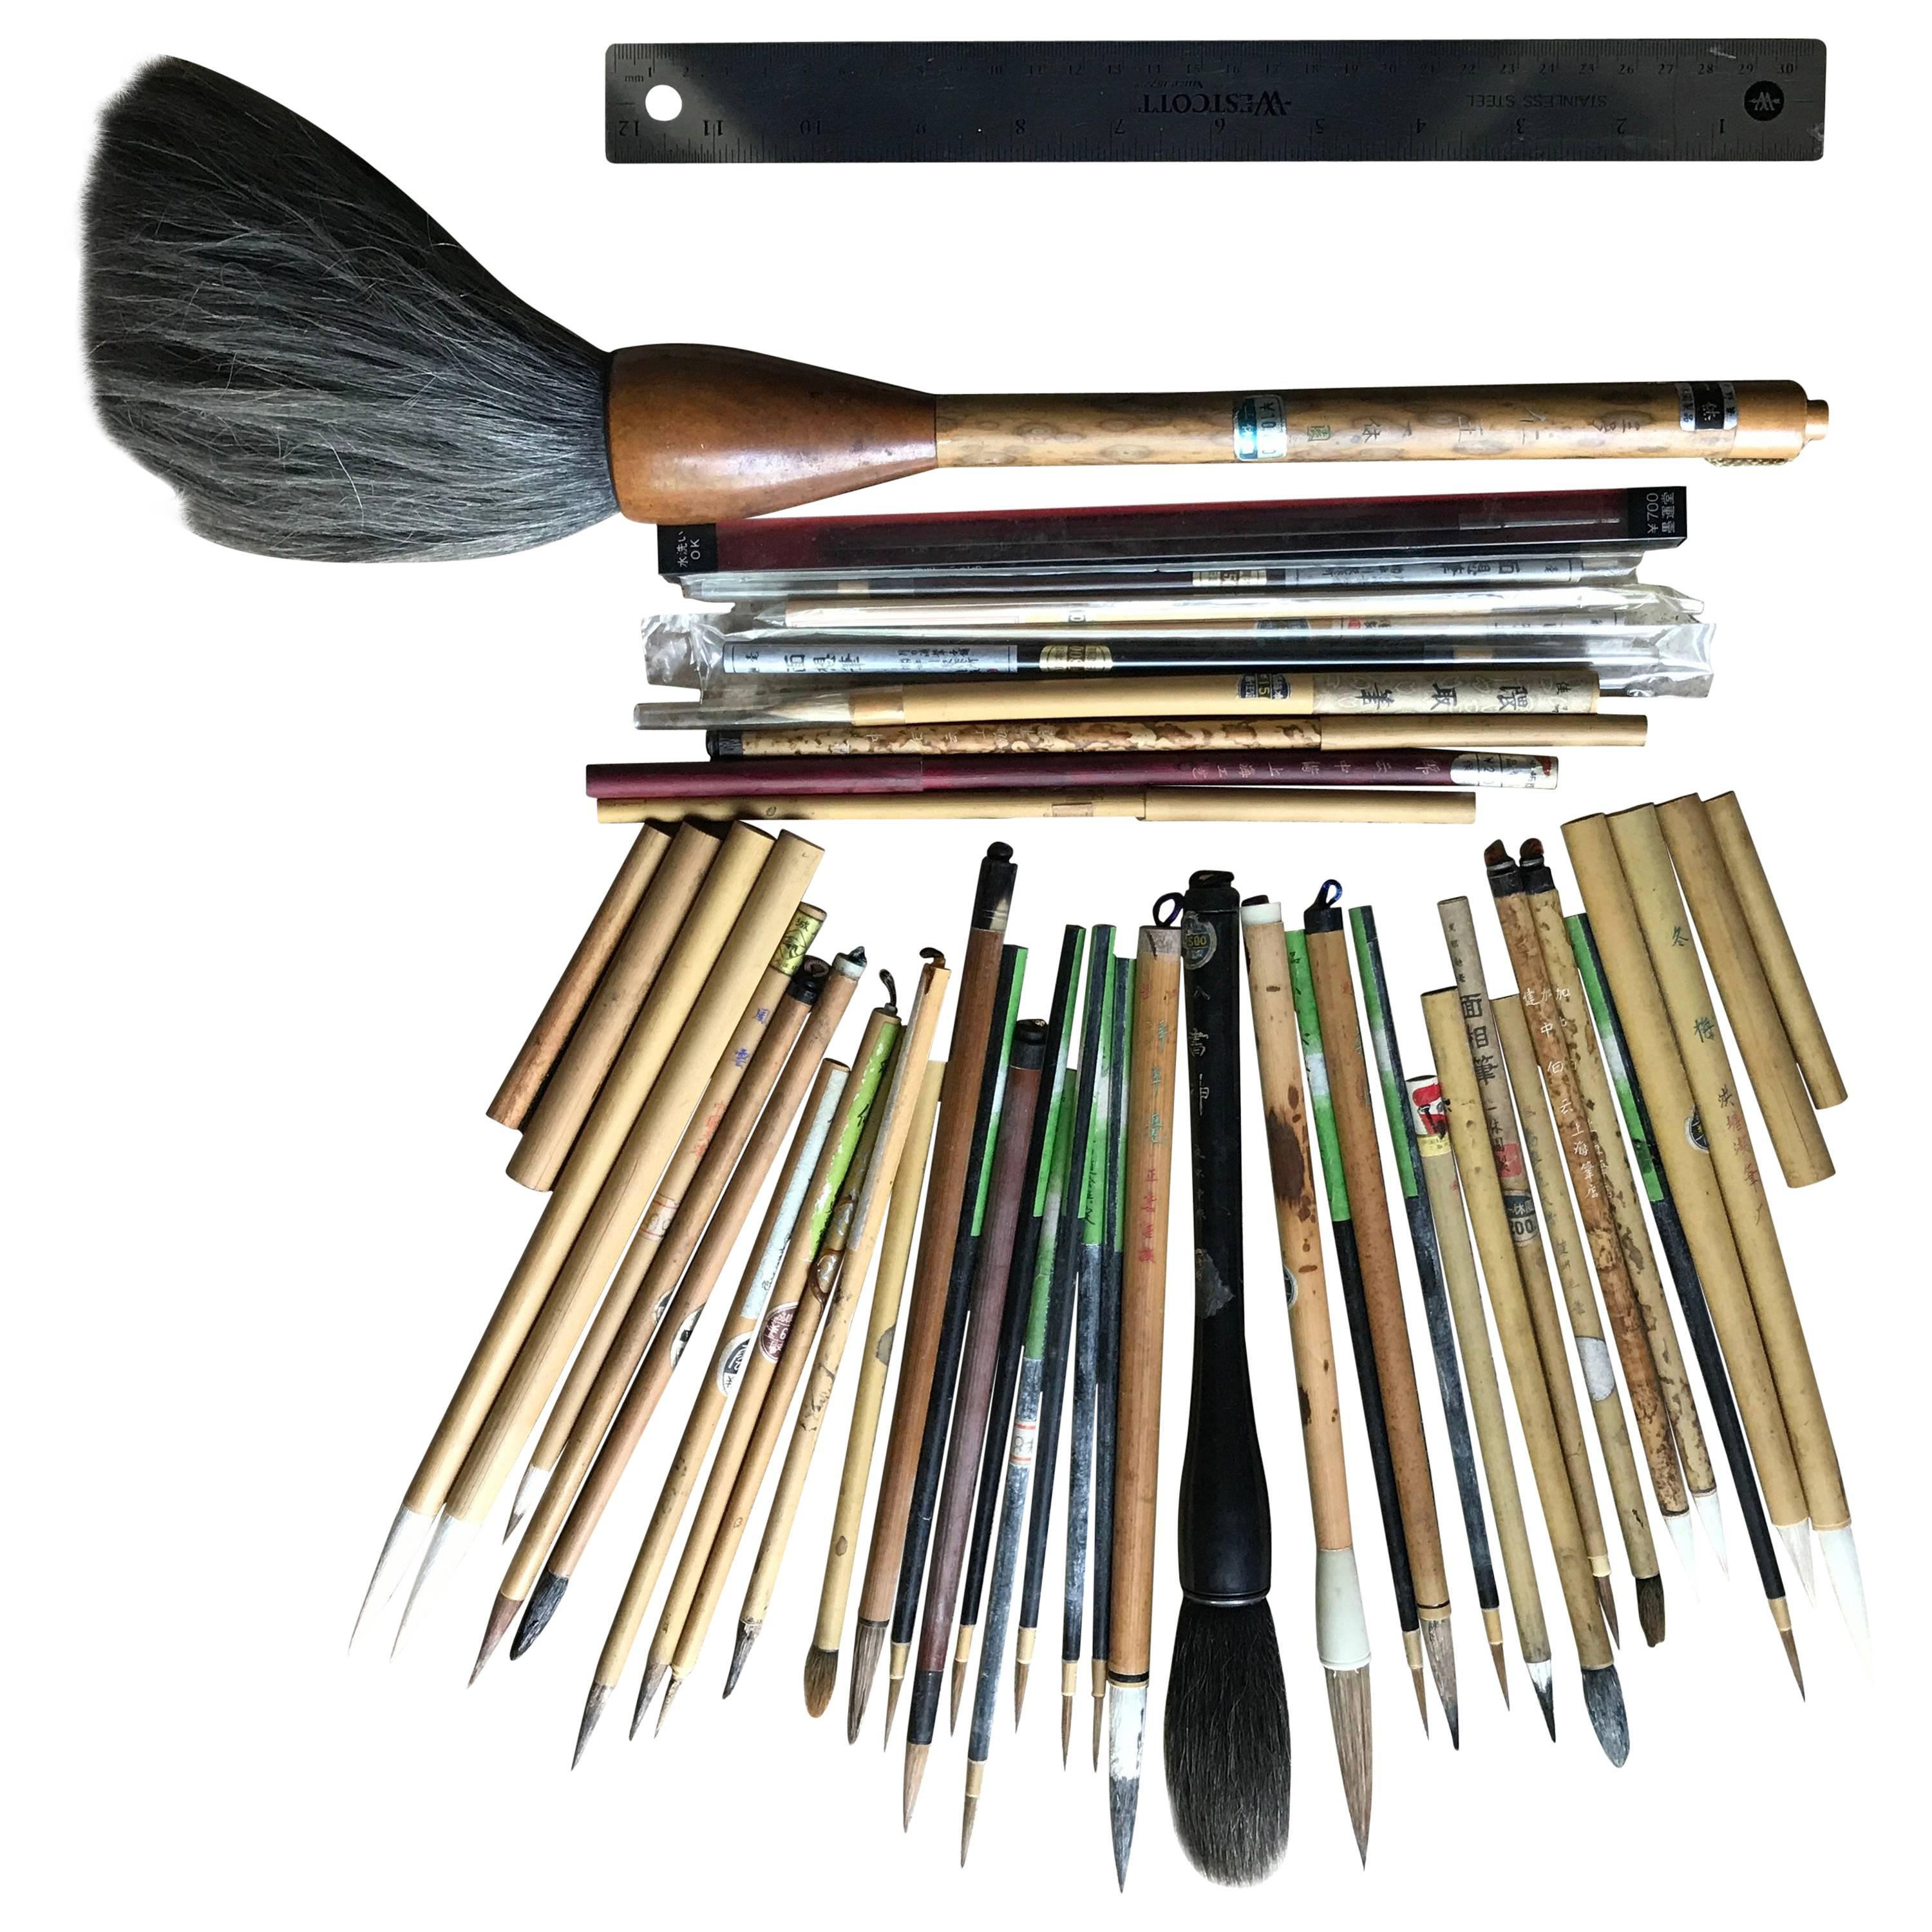 Found! Antique Artisan's Cache of 43 Old Paint and Calligraphy Bamboo Brushes